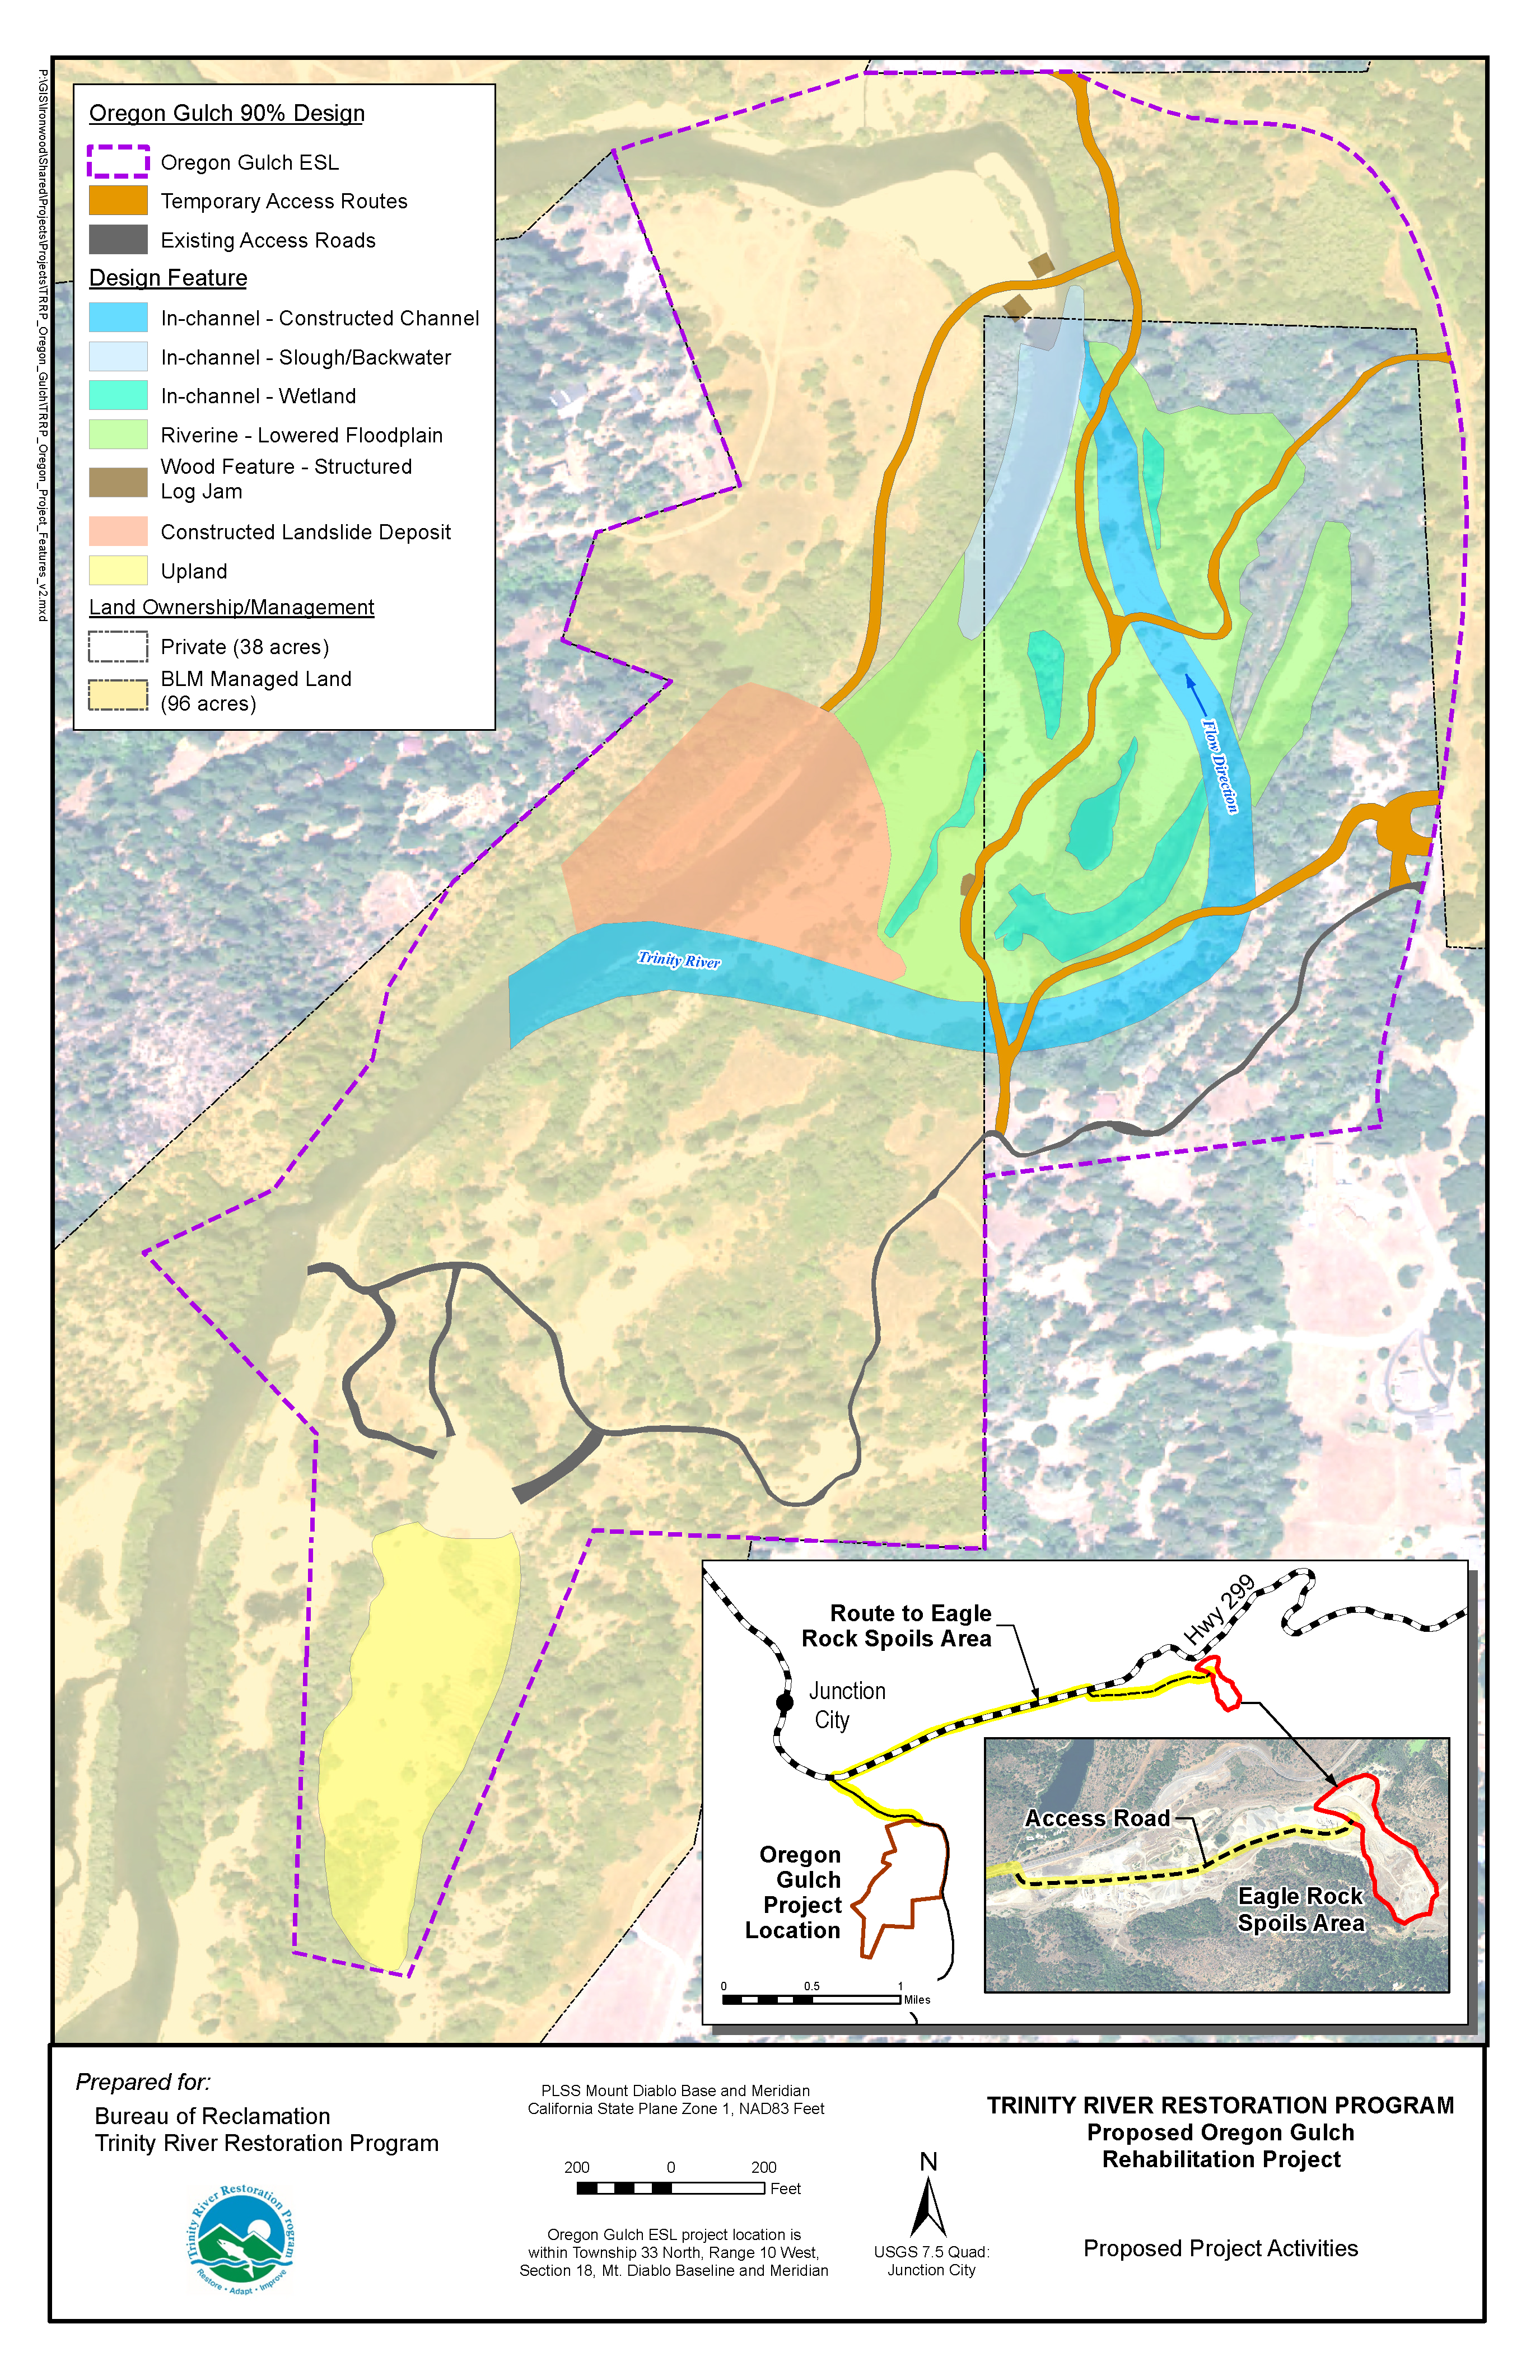 Oregon Gulch Proposed Project Features